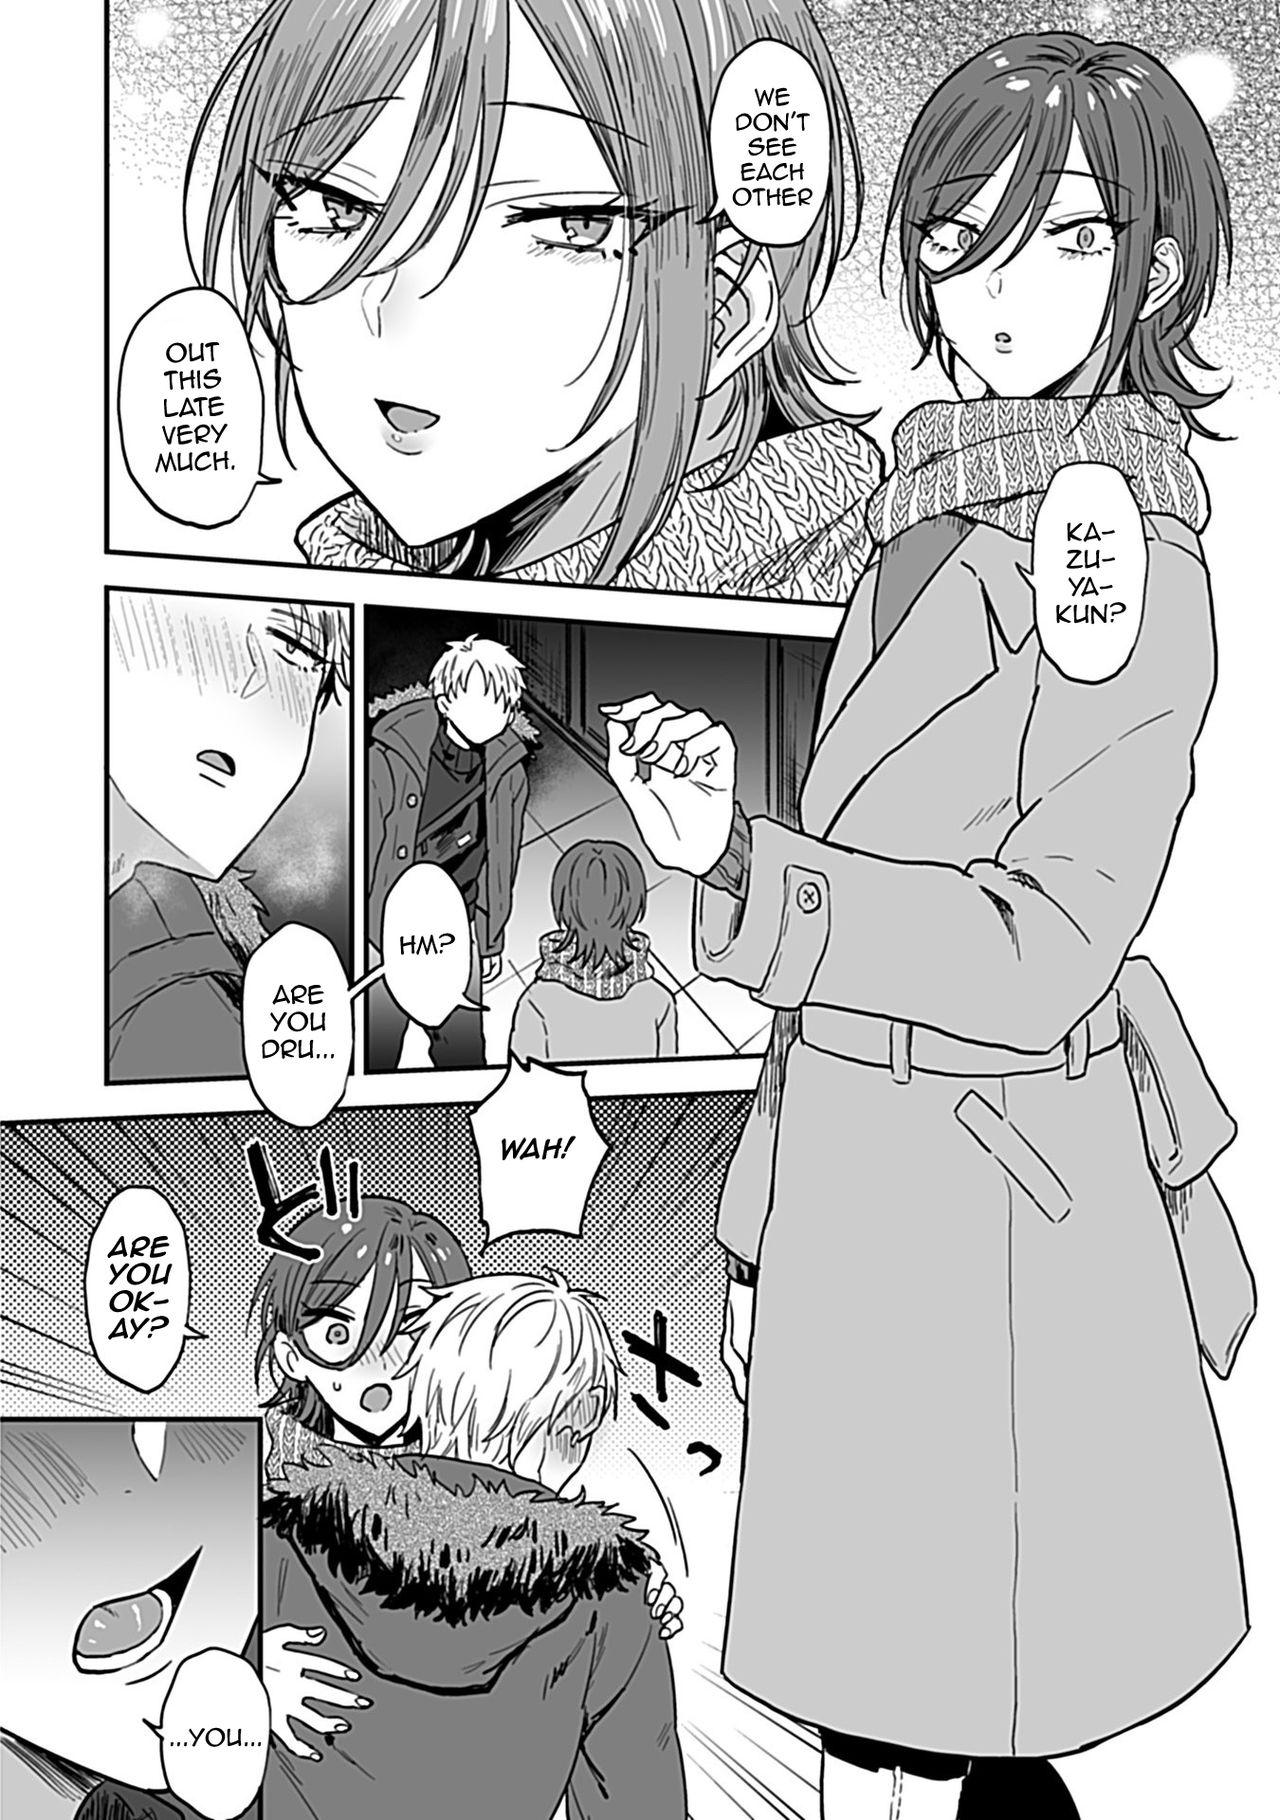 Top [Ainaryumu] Tonari no Ecchi na Onii-san. 1 - The sexy boy who lives in the next! [R18] [English] [mysterymeat3] Real Amateurs - Page 4